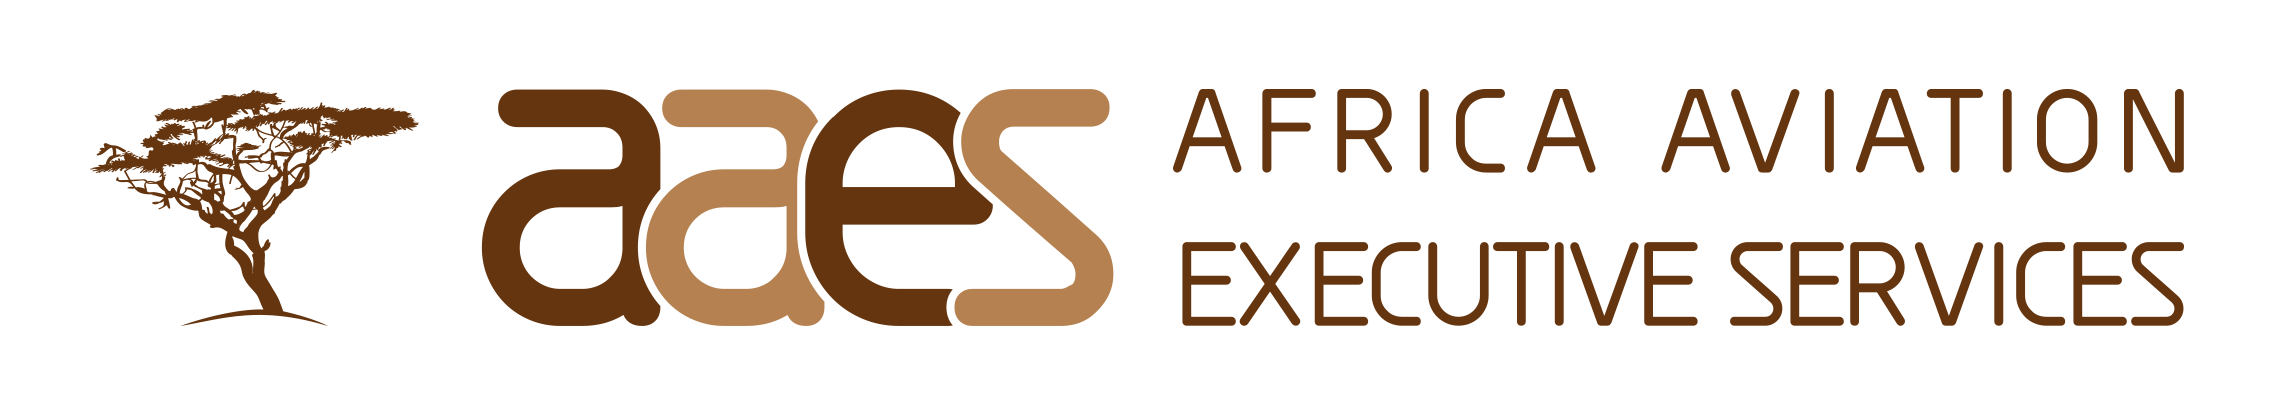 Africa Aviation Executive Services